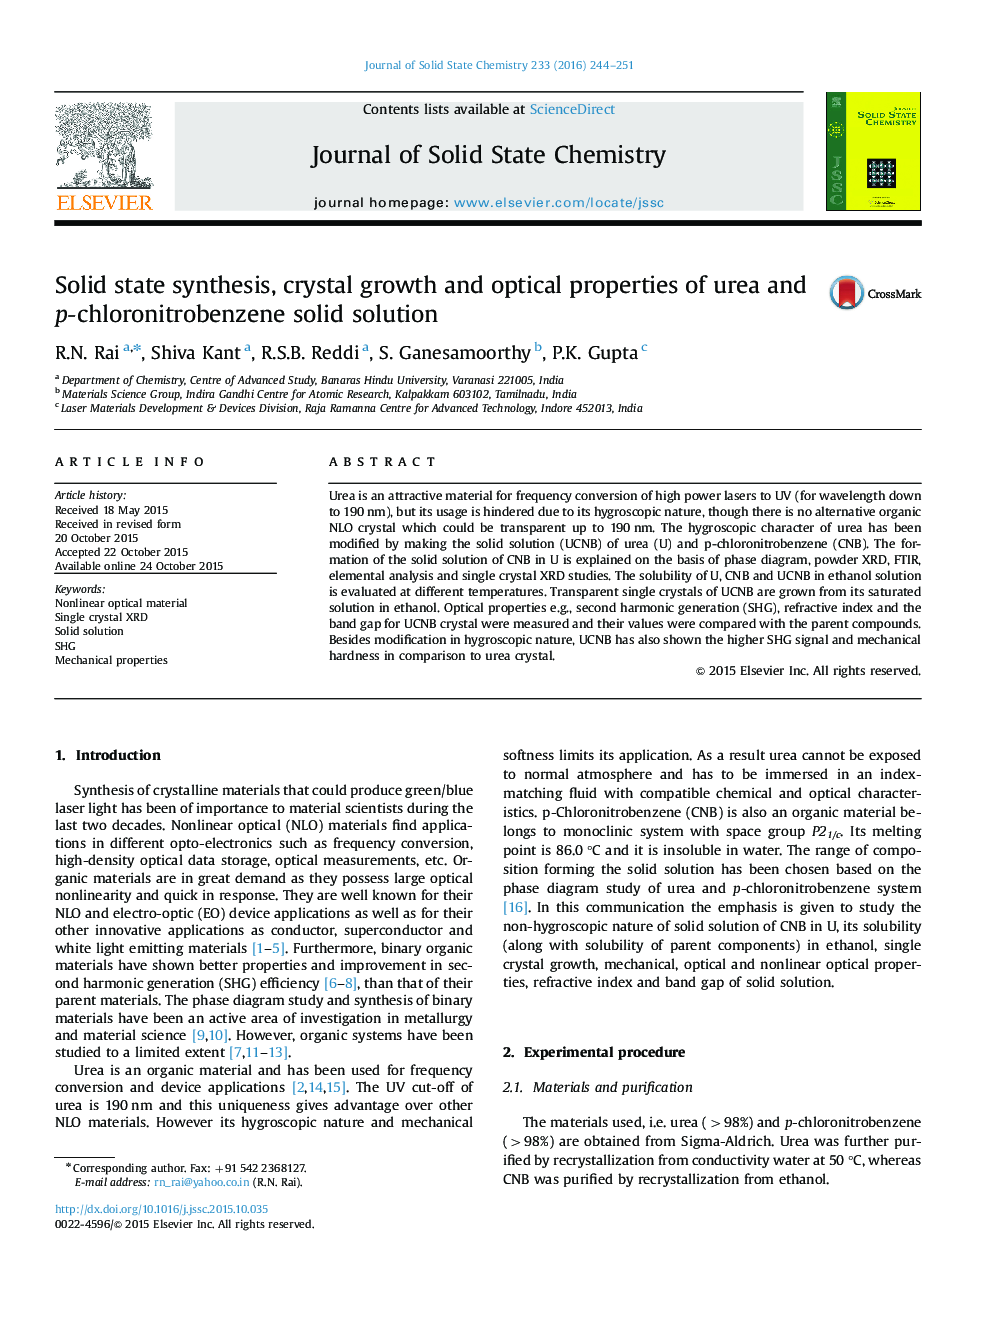 Solid state synthesis, crystal growth and optical properties of urea and p-chloronitrobenzene solid solution